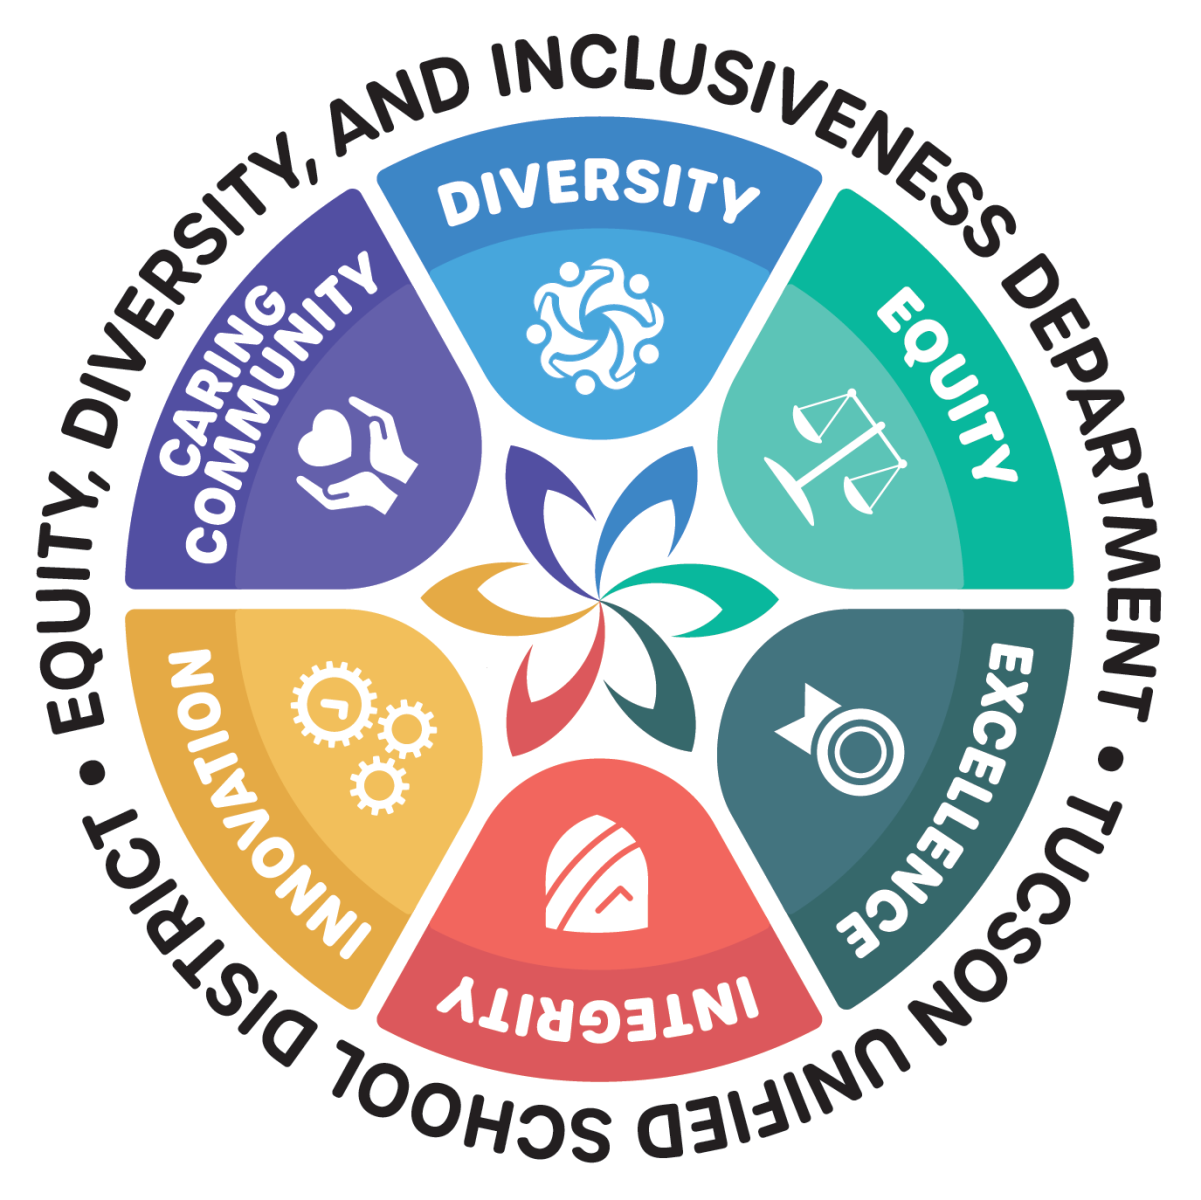 Circular EDI logo includes colorful equity, diversity, excellence, integrity, innovation, and caring community pie slices